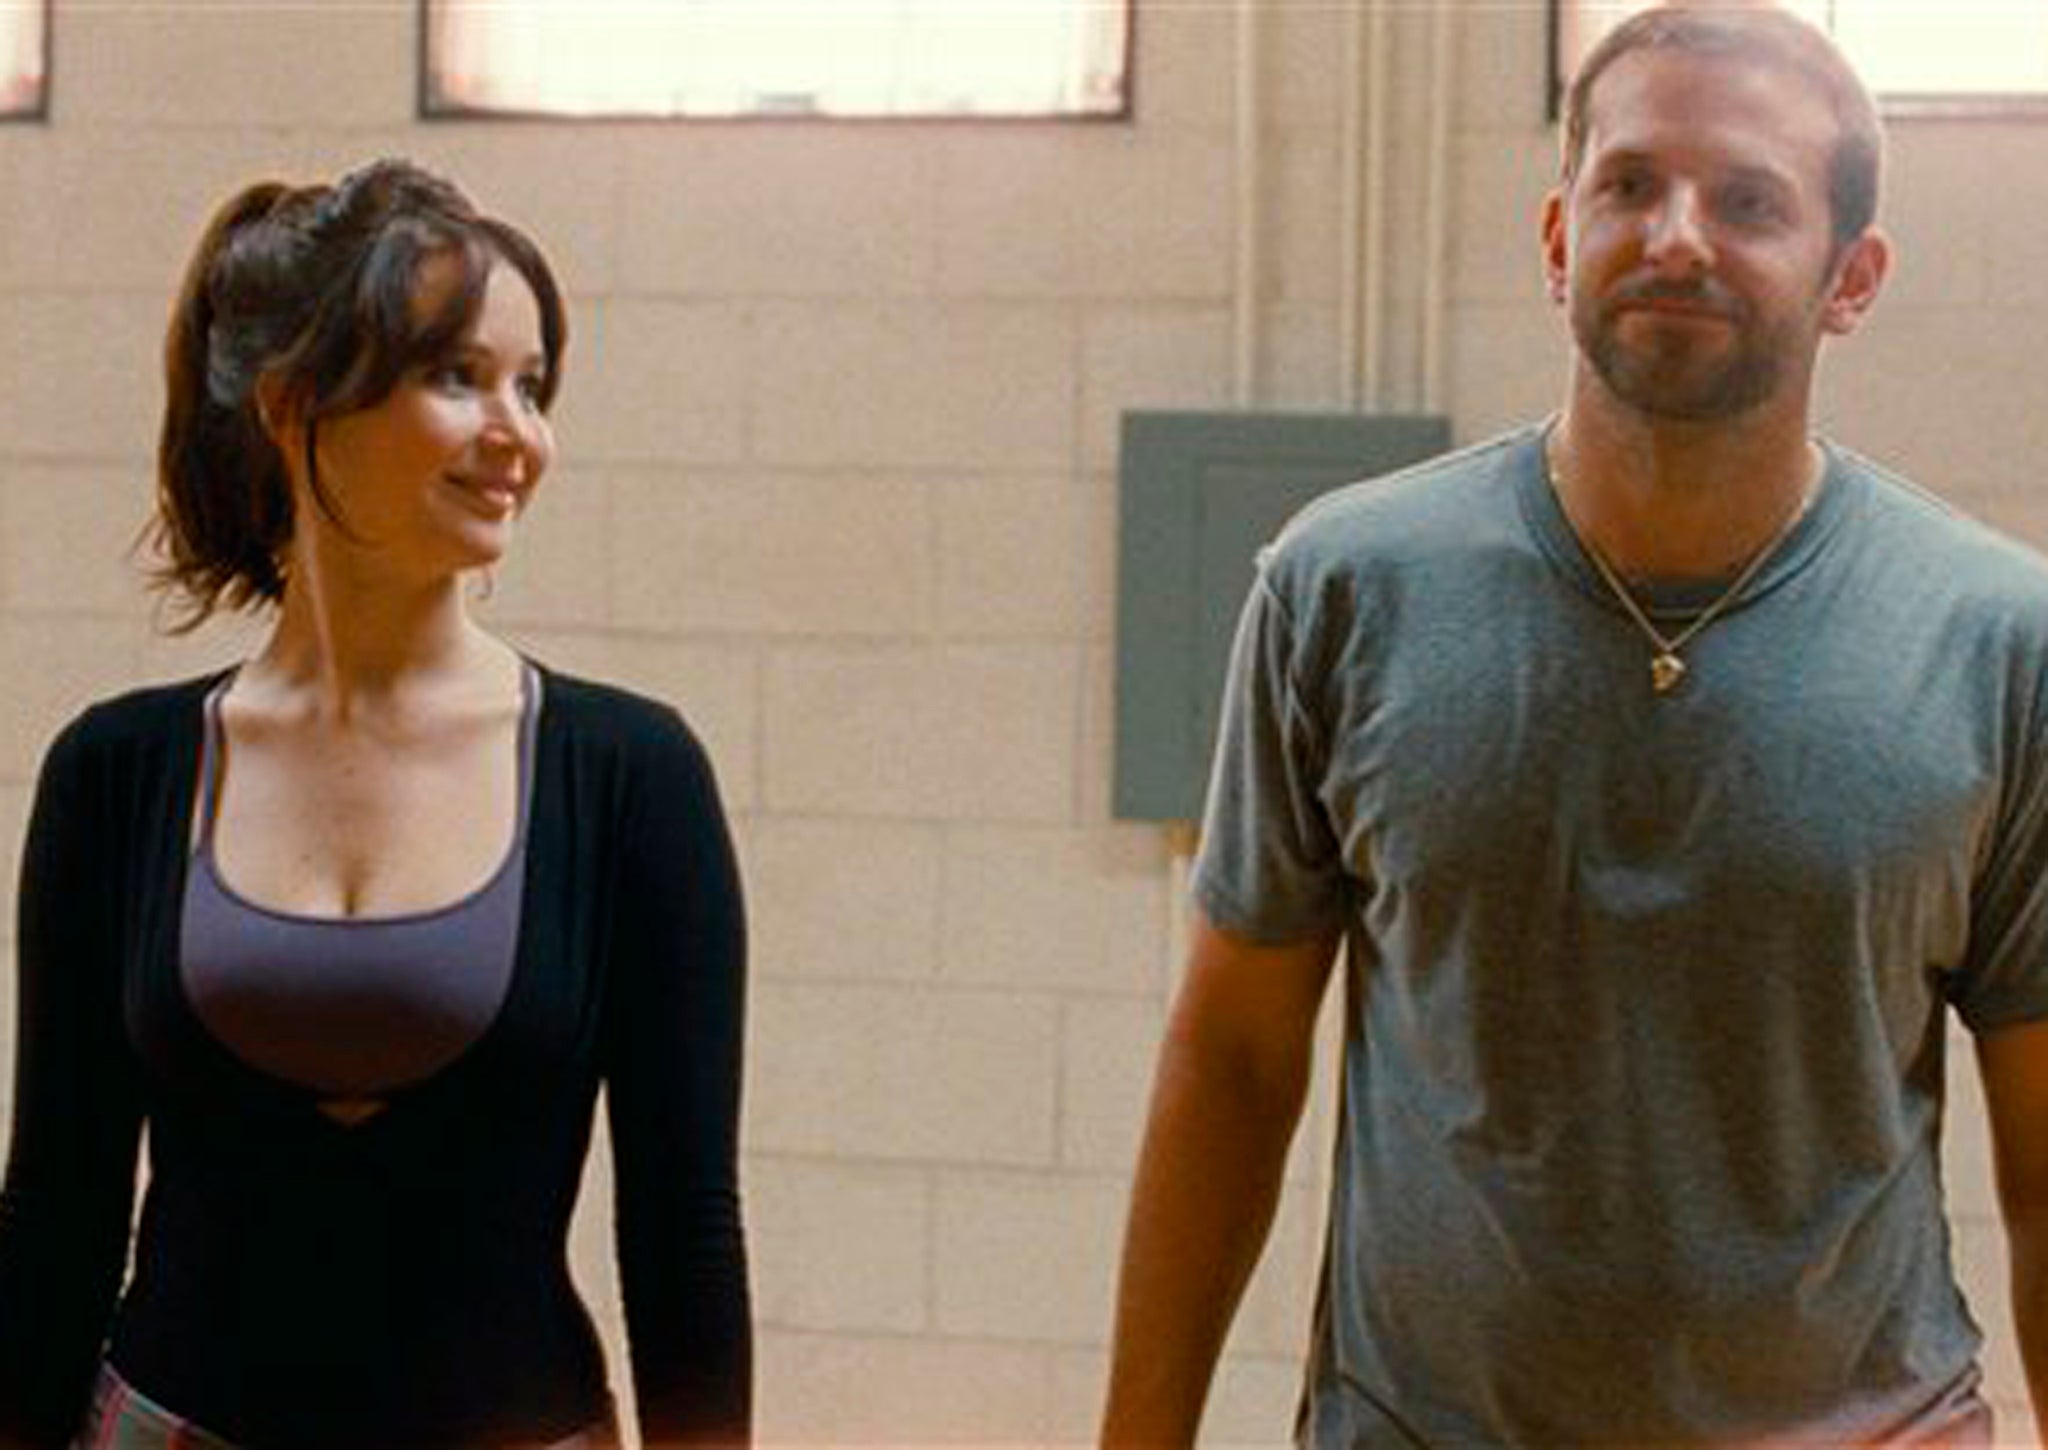 Bradley Cooper and Jennifer Lawrence in David O Russell's Silver Linings Playbook